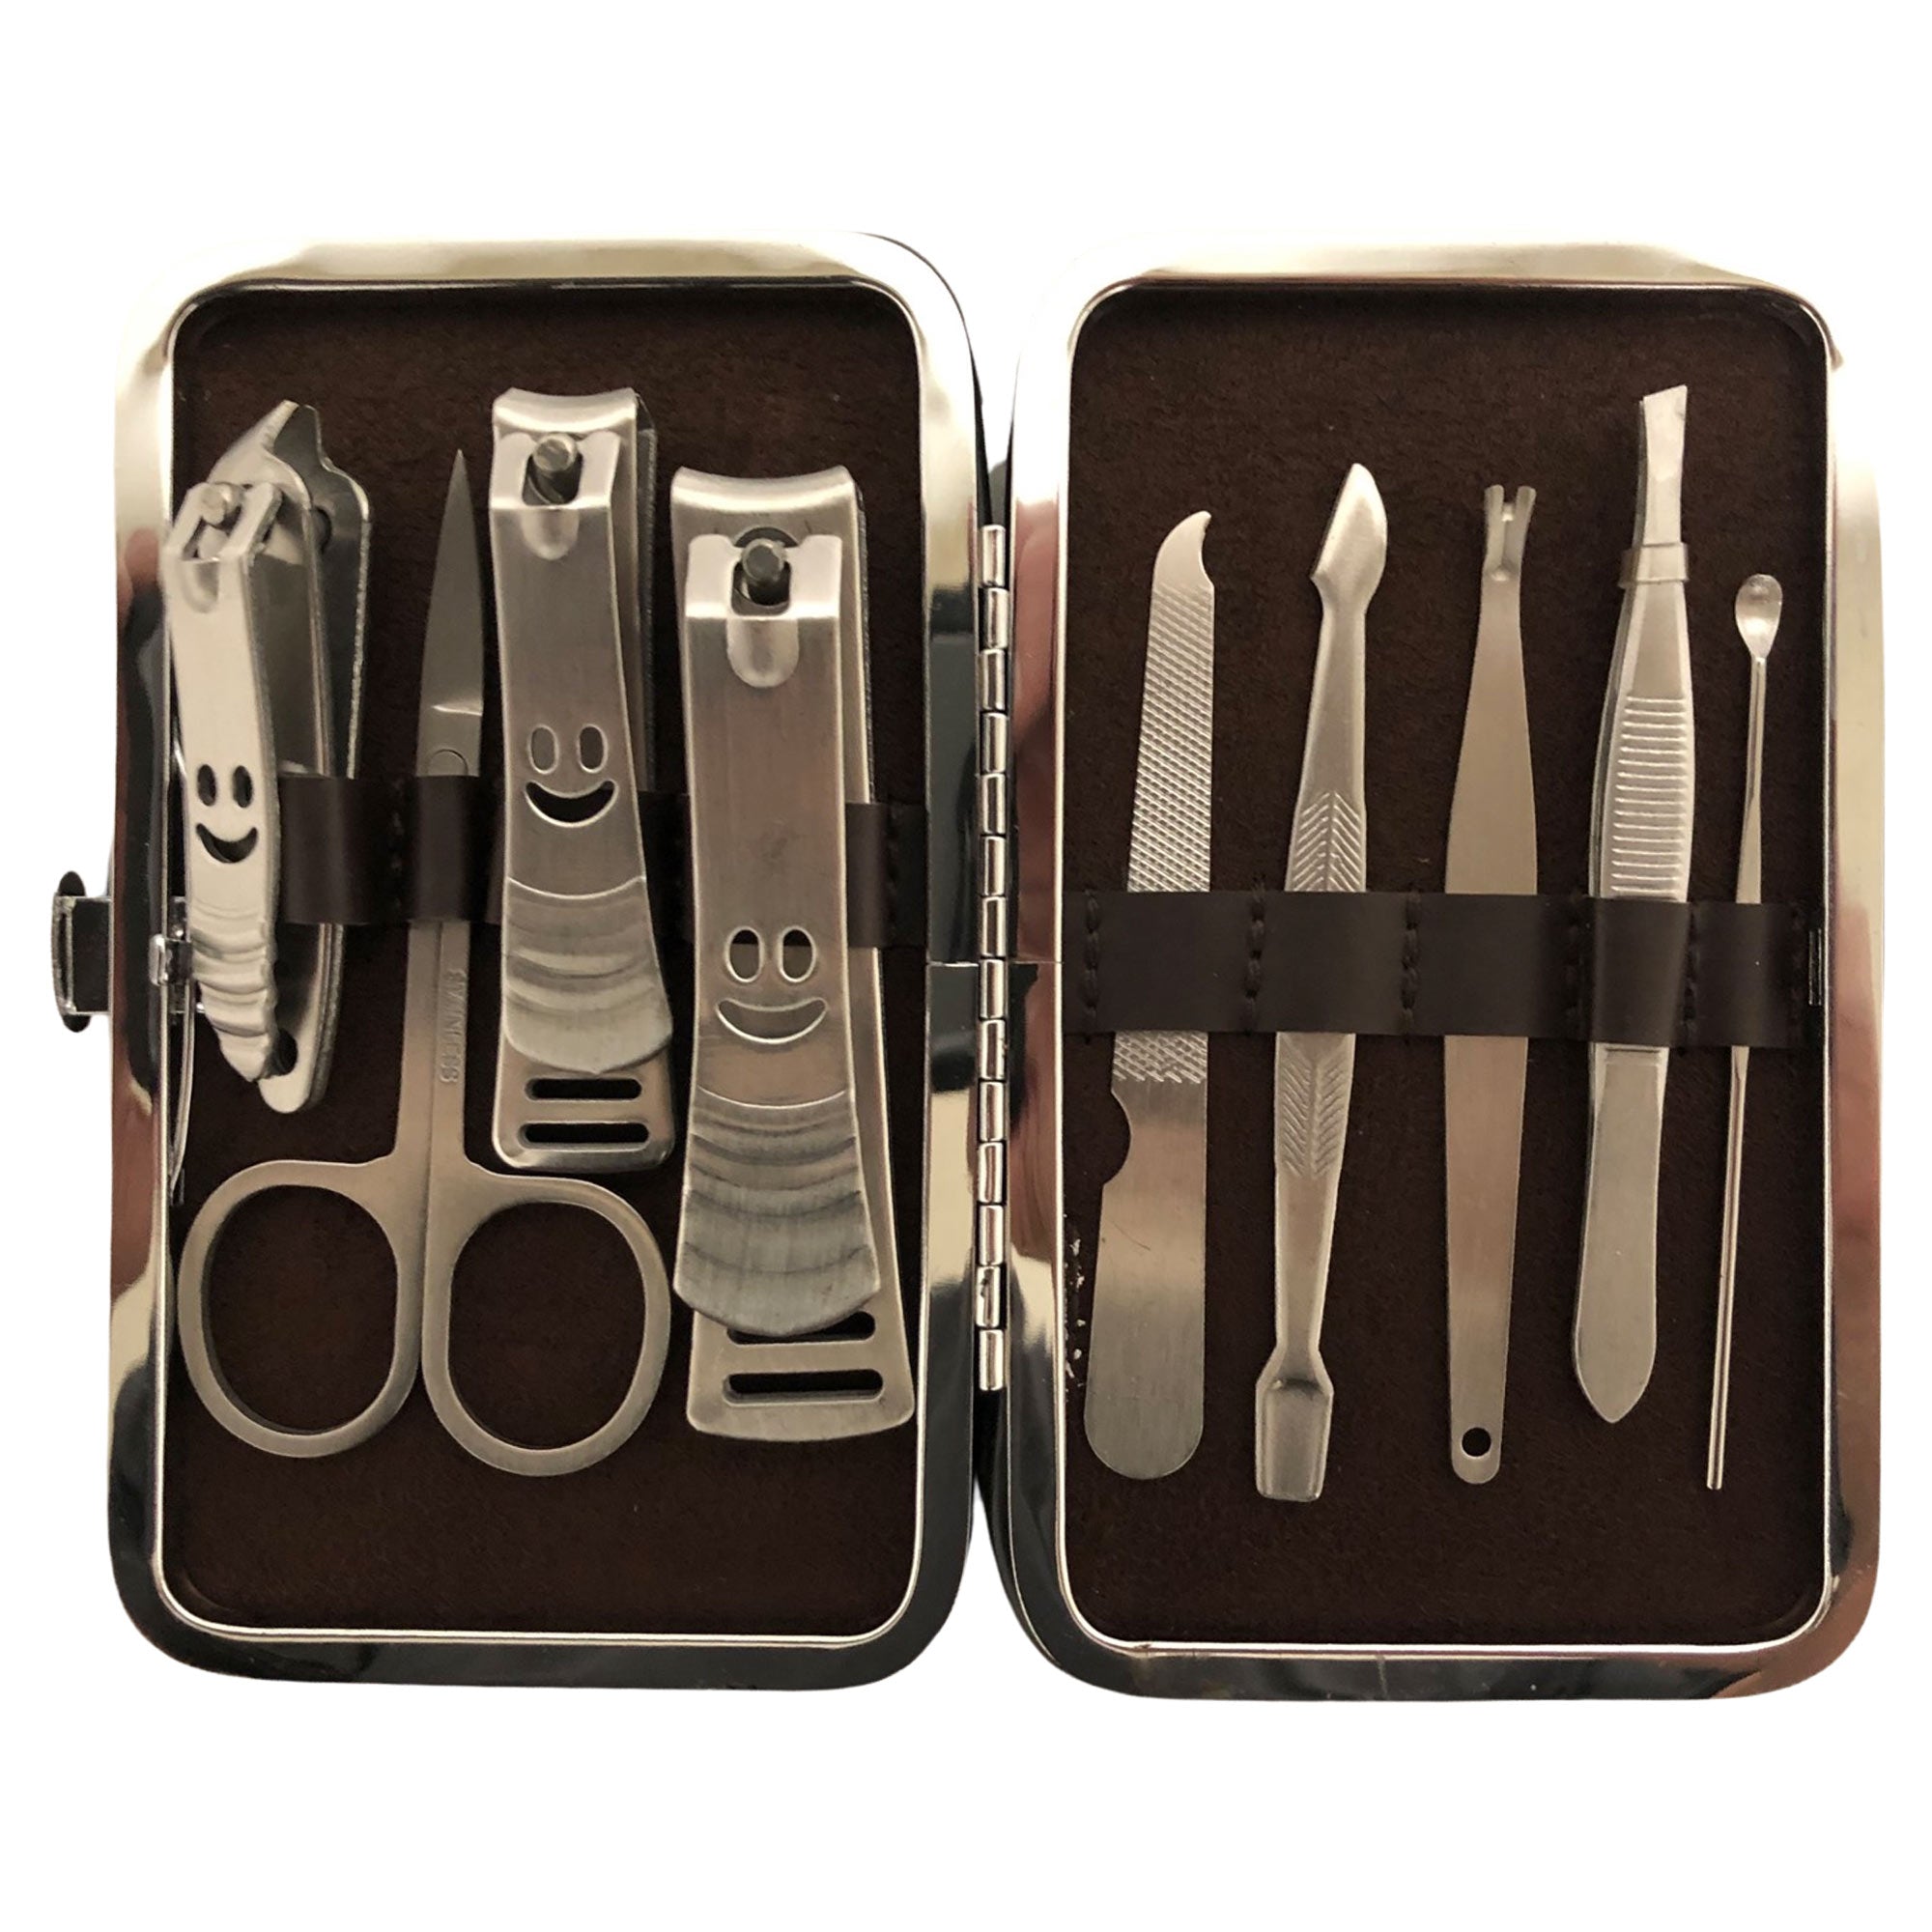 CLEARANCE BROWN SNAKE  PRINT MANICURE SET (CASE OF 24 - $2.50 / PIECE)  Wholesale 9 Piece Stainless Steel Manicure Set in Brown Snake SKU: 9699-SNK-BROWN-24